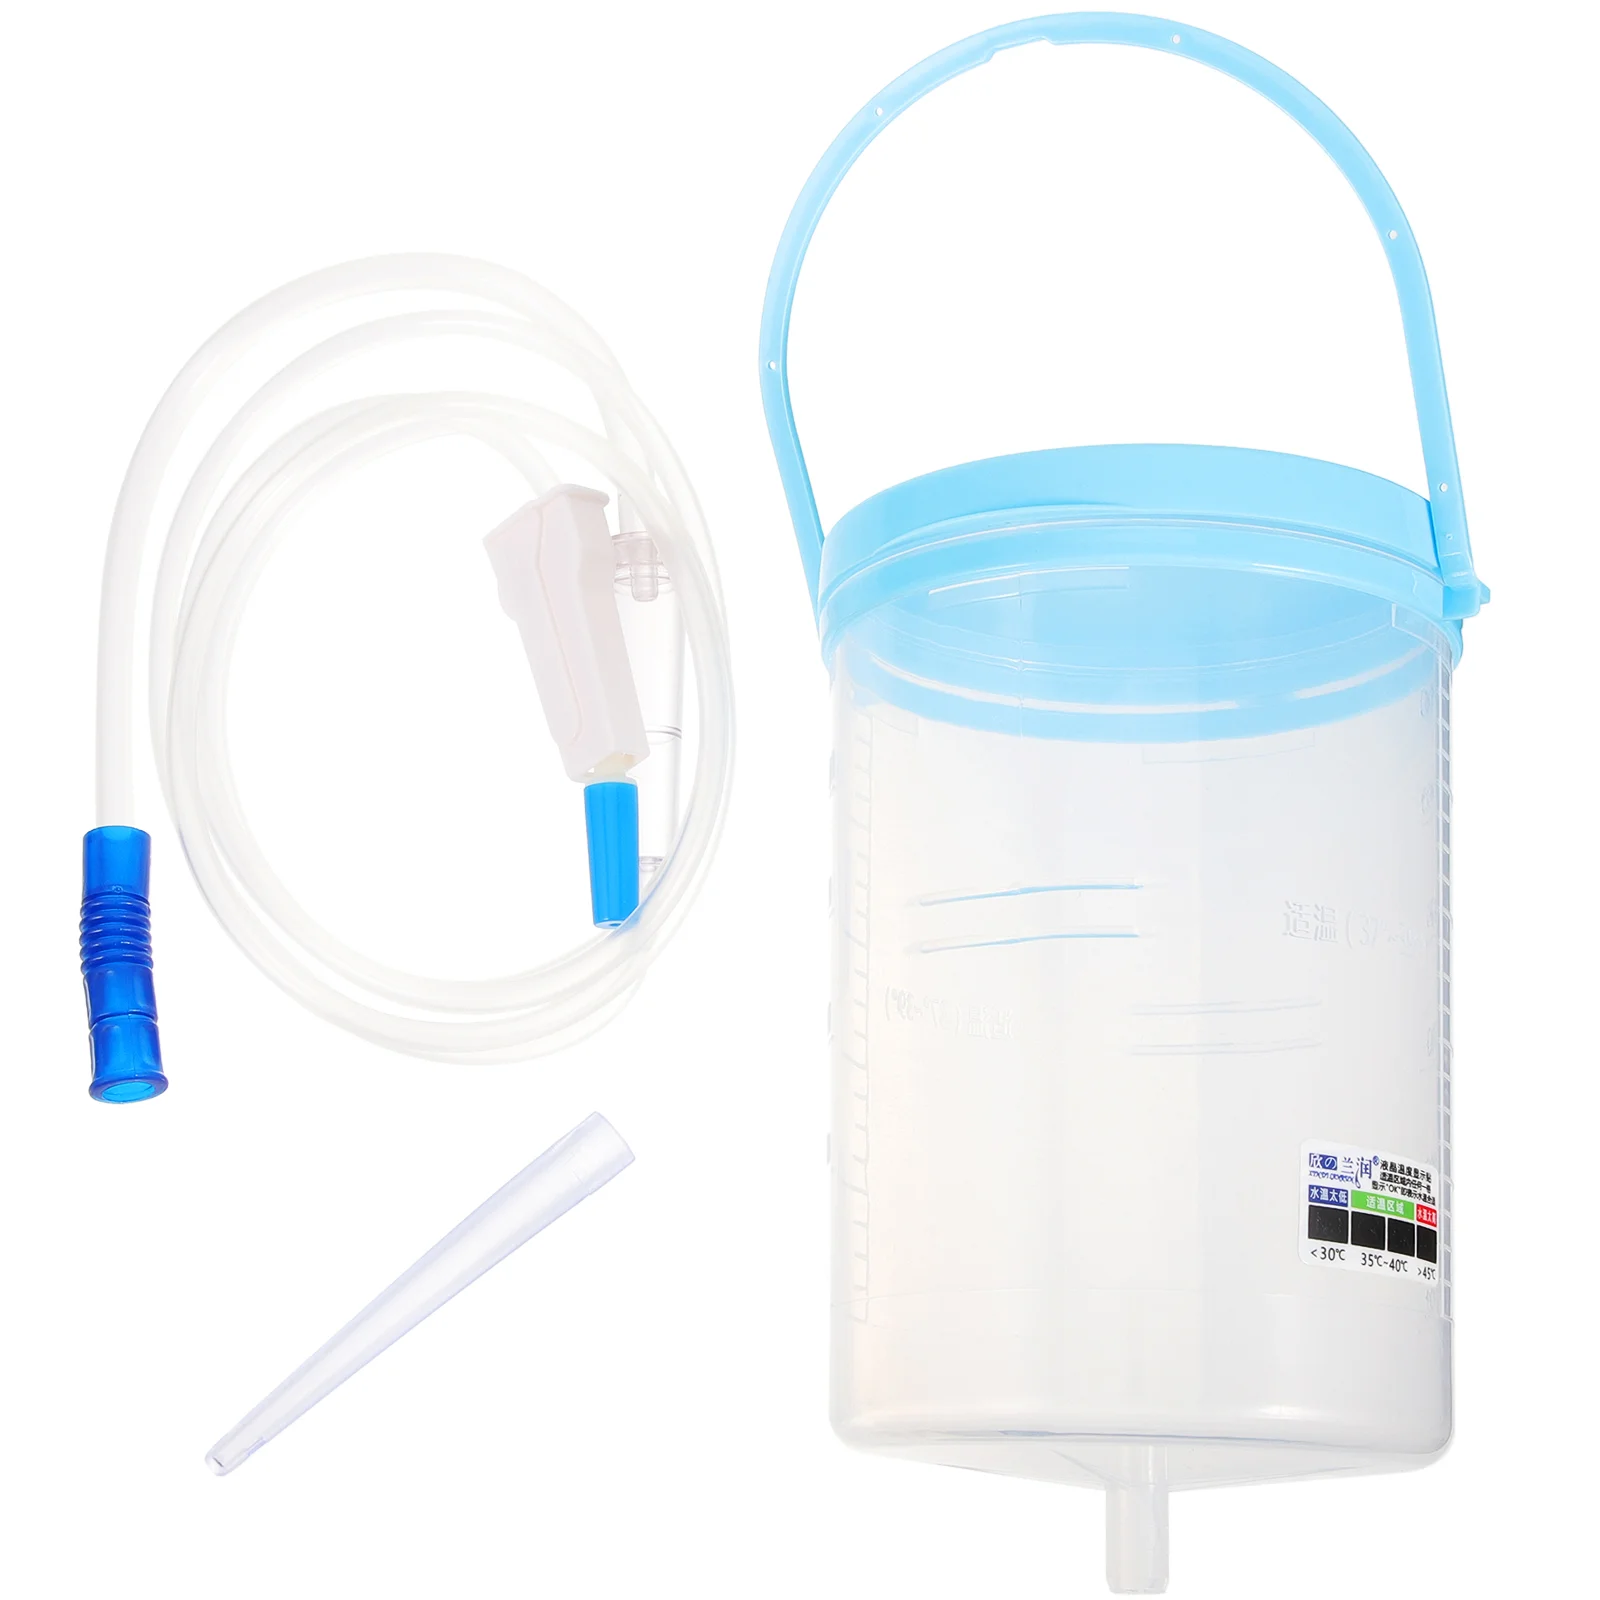 

Mist Cleaner Enema Bucket Kit Household Convenient Cleaning Tool Bag Vaginal Douche Silica Gel